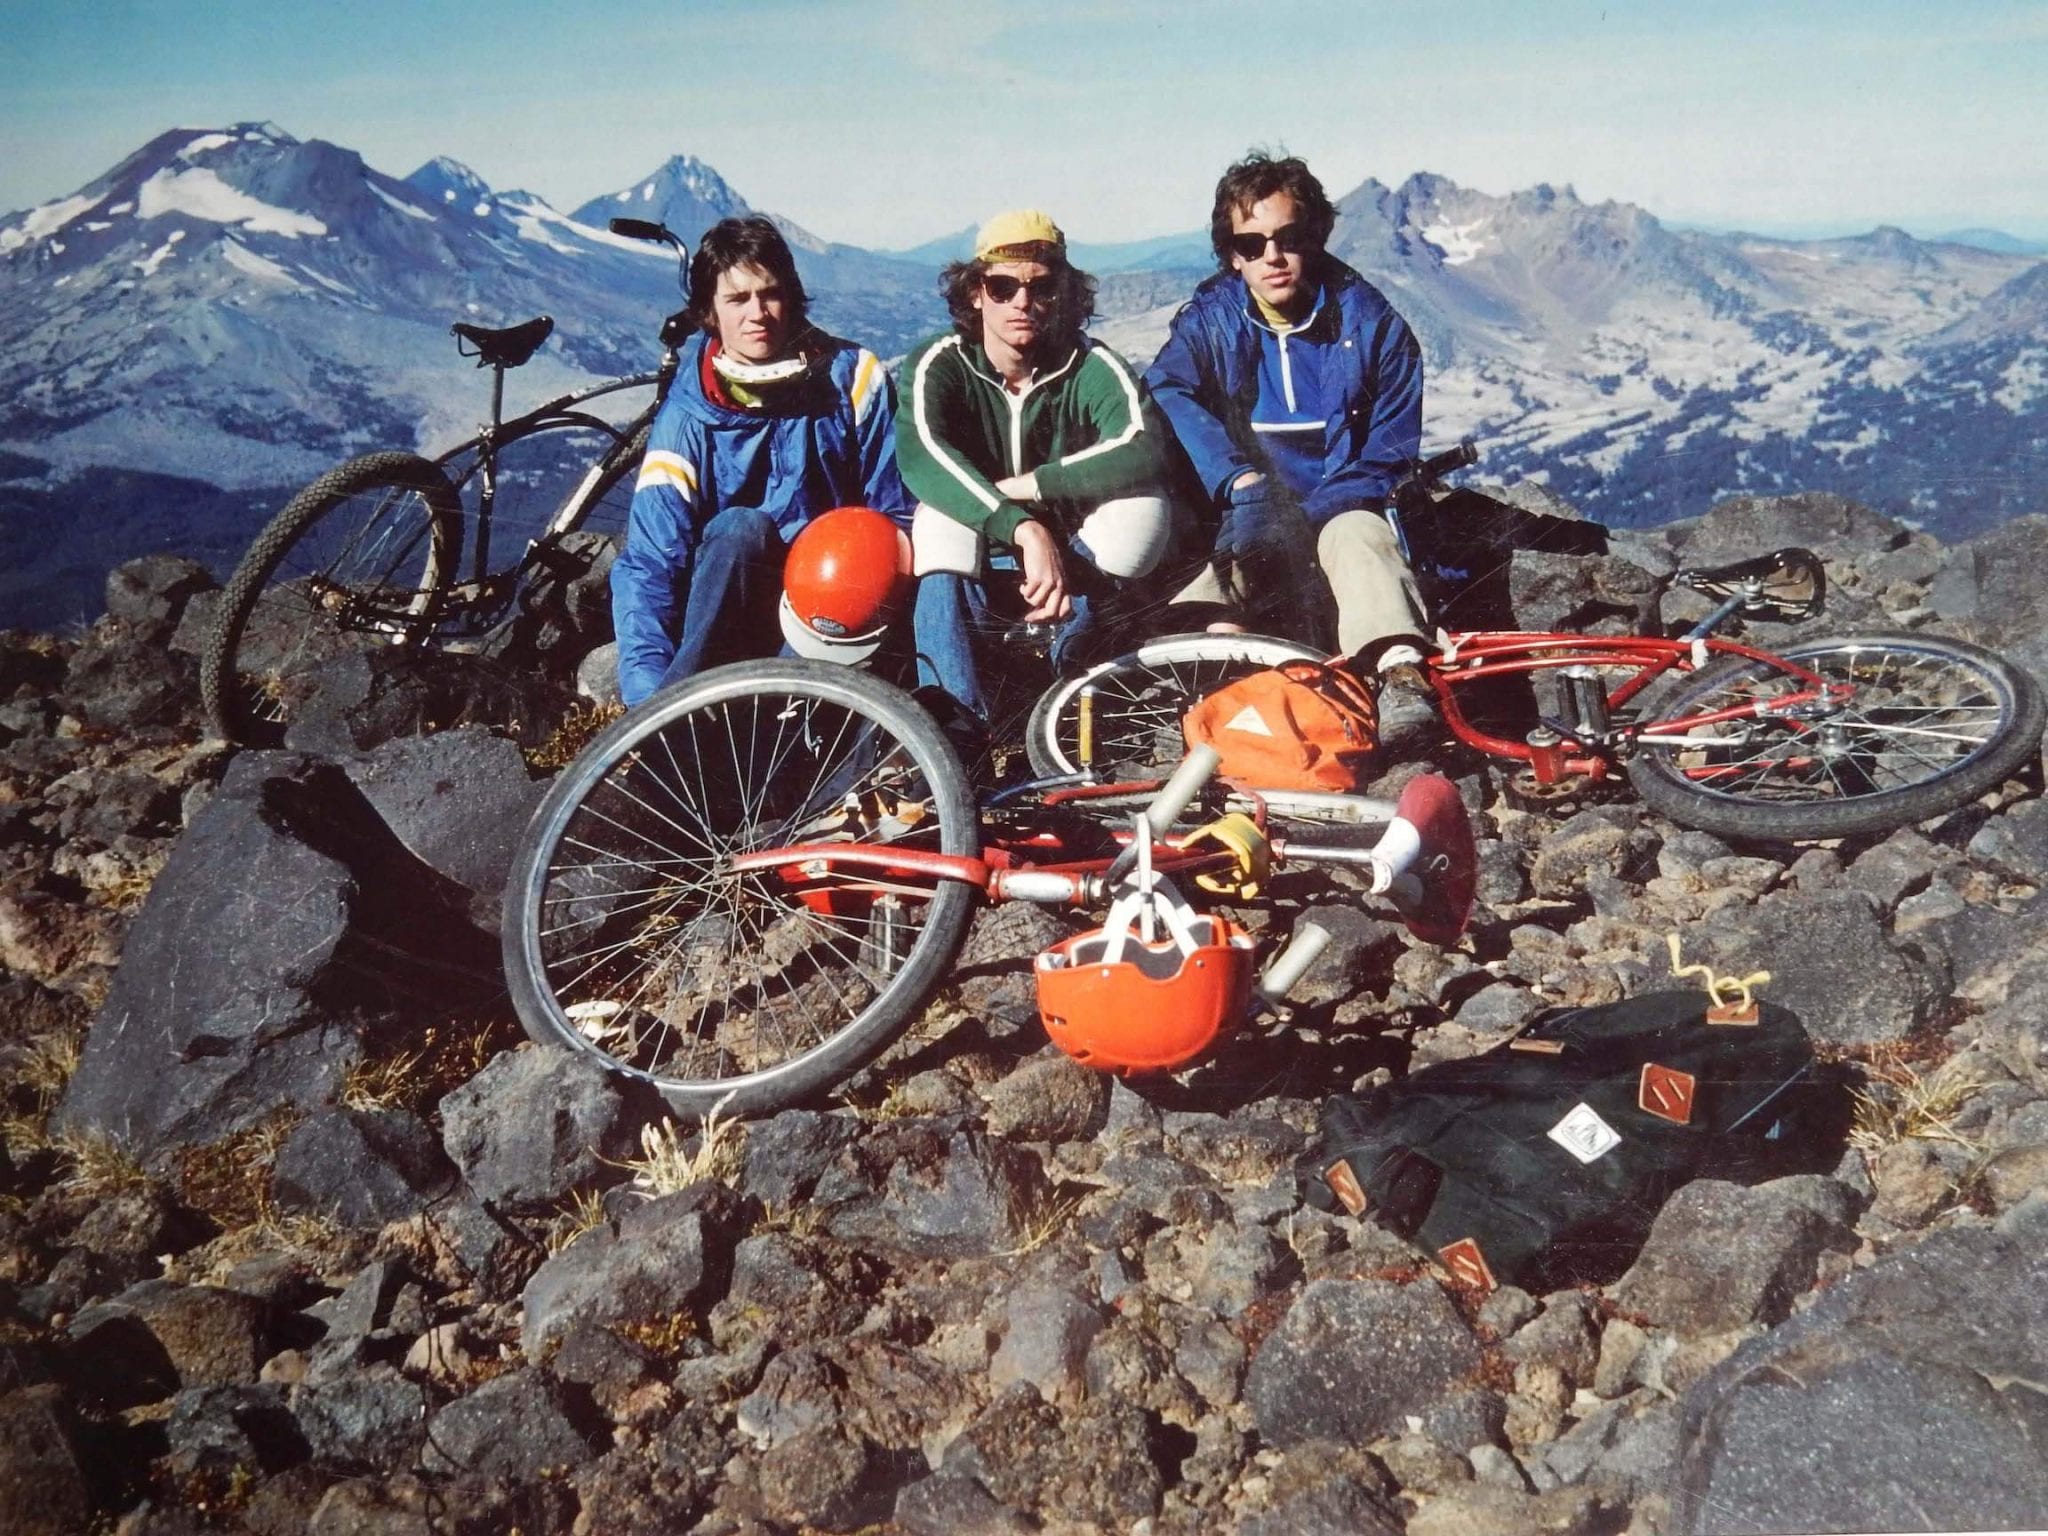 Tim Boyle, Don Ipock and Gary Bonacker sit on the summit of Mt. Bachelor in 1976 with their “Klunker” bikes, an early, one-speed version of a mountain bike.